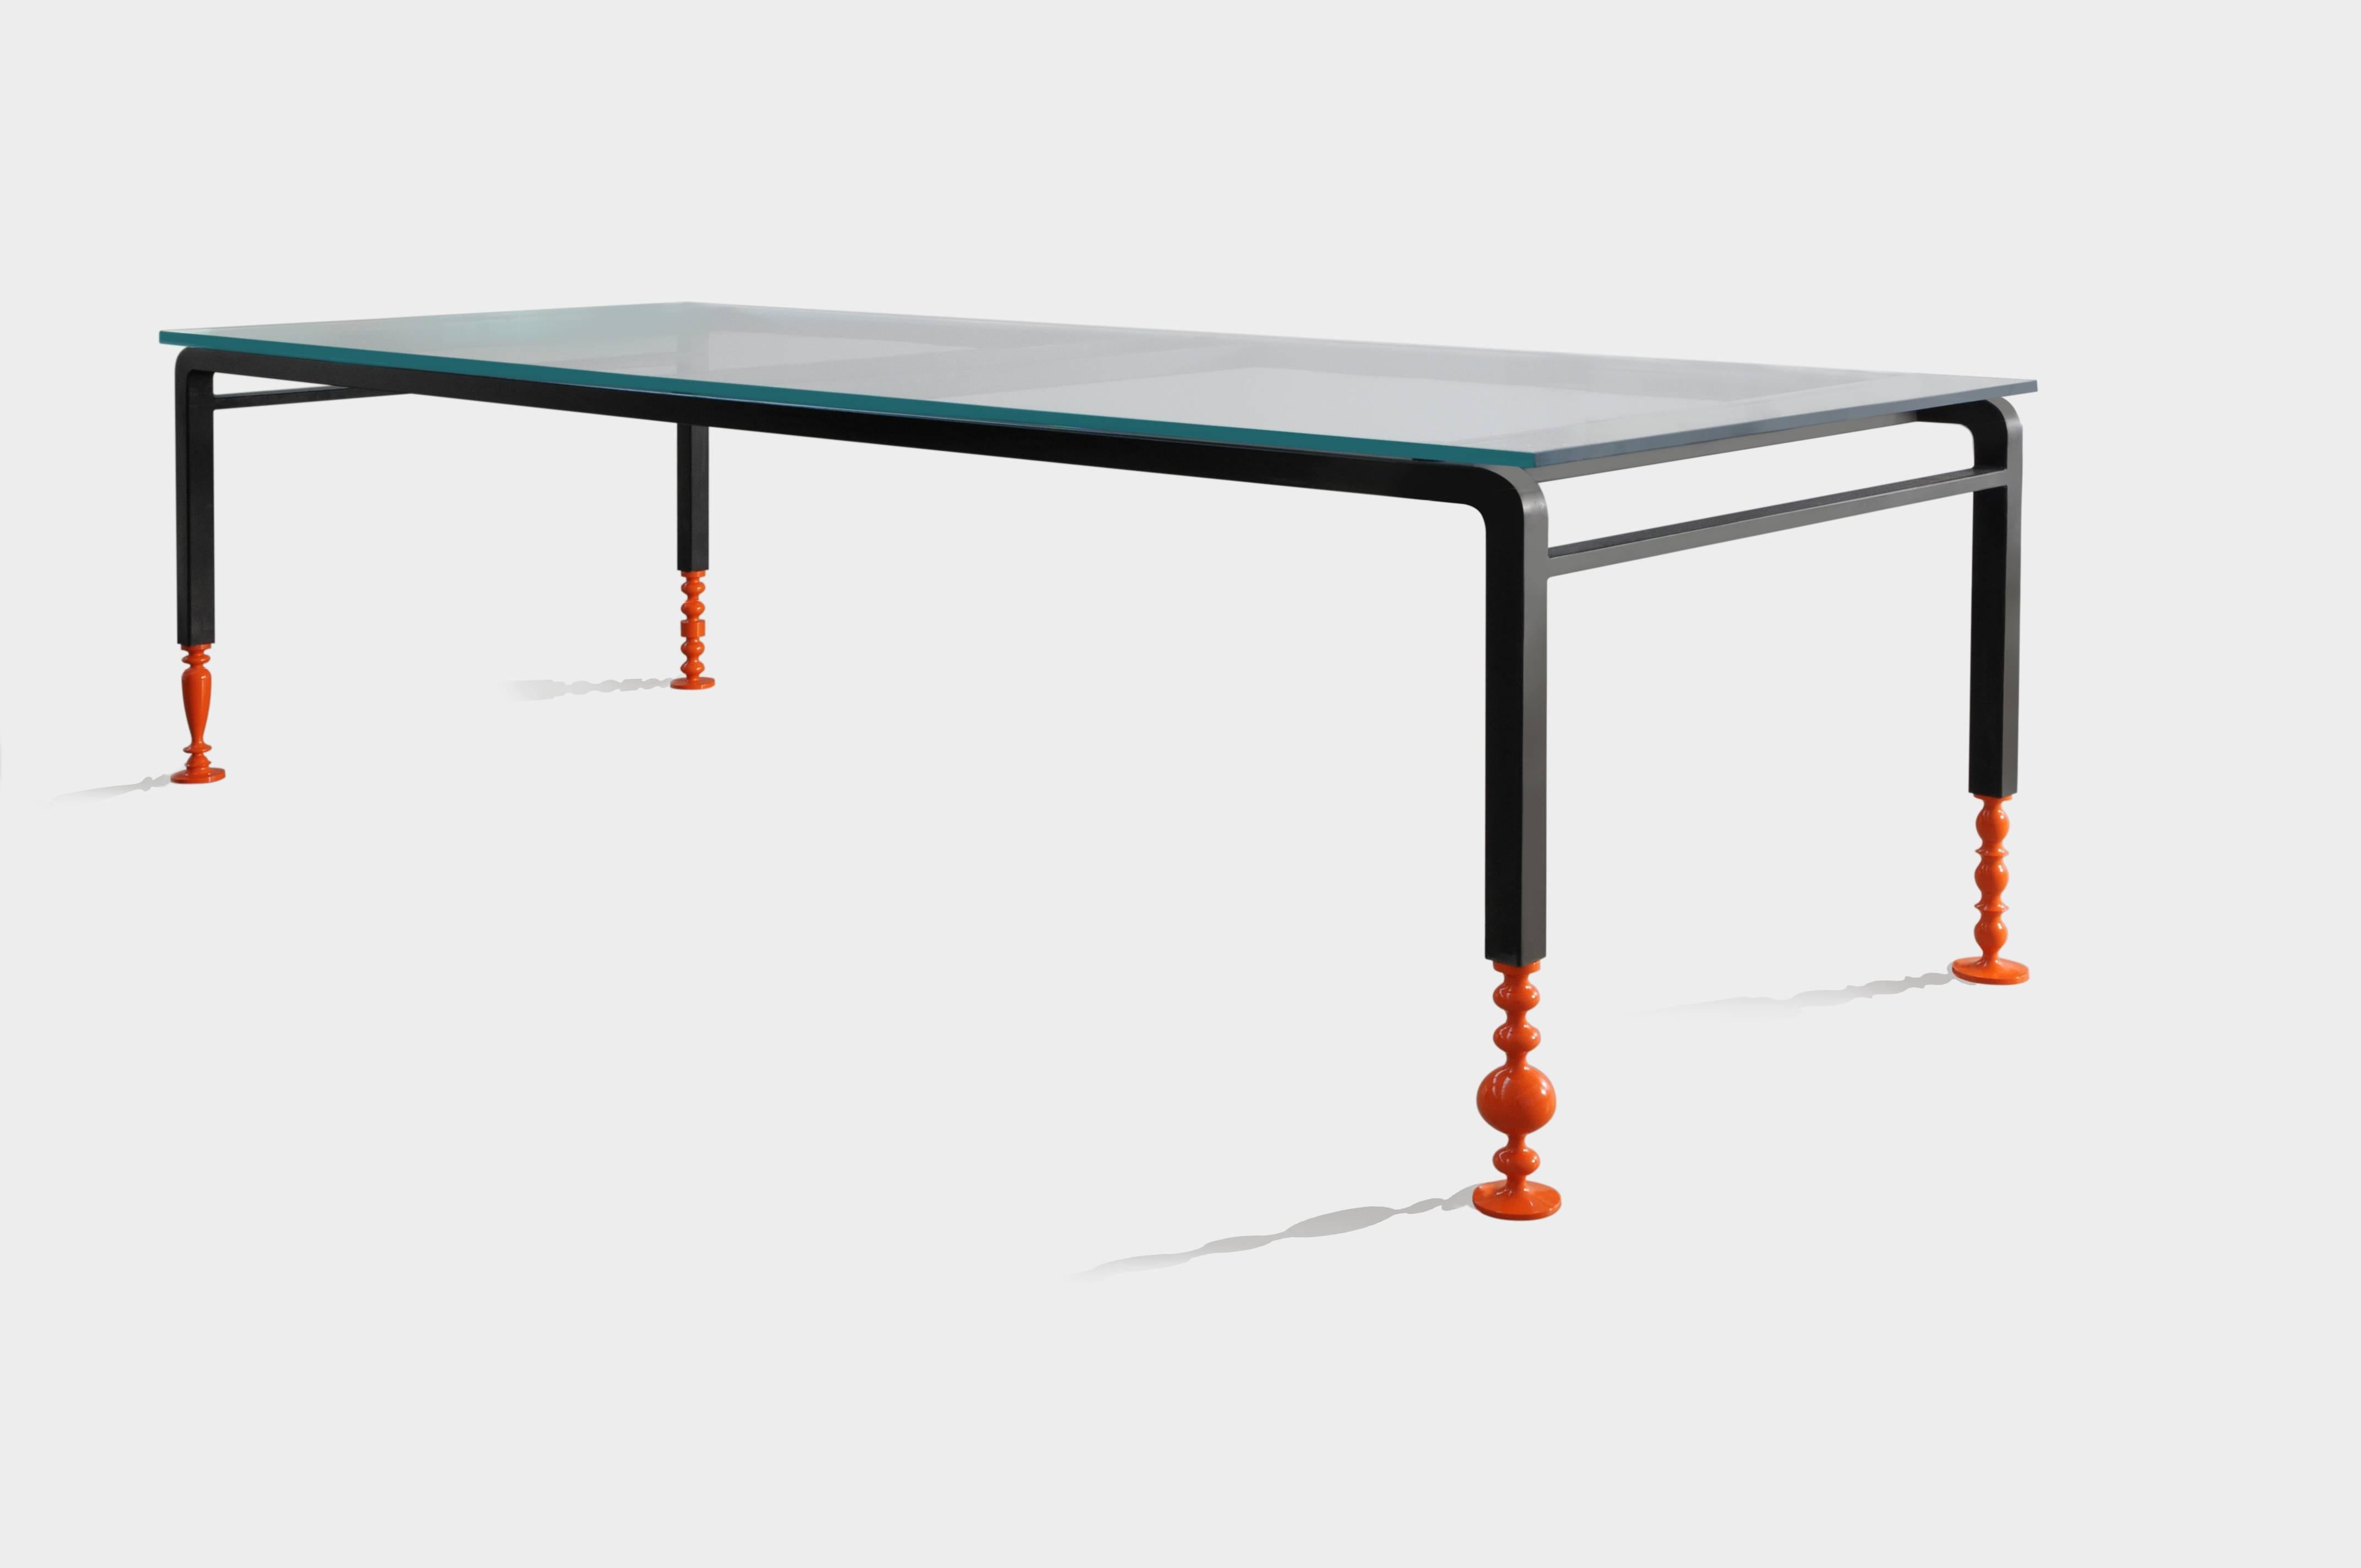 Charpoi table is inspired by the basic bed used in the villages throughout India.
The feet lacquered or chrome-plated give a fragility look as the structure was supported on glass feet. 

Stainless steel, black oxidation, transparent and glossy